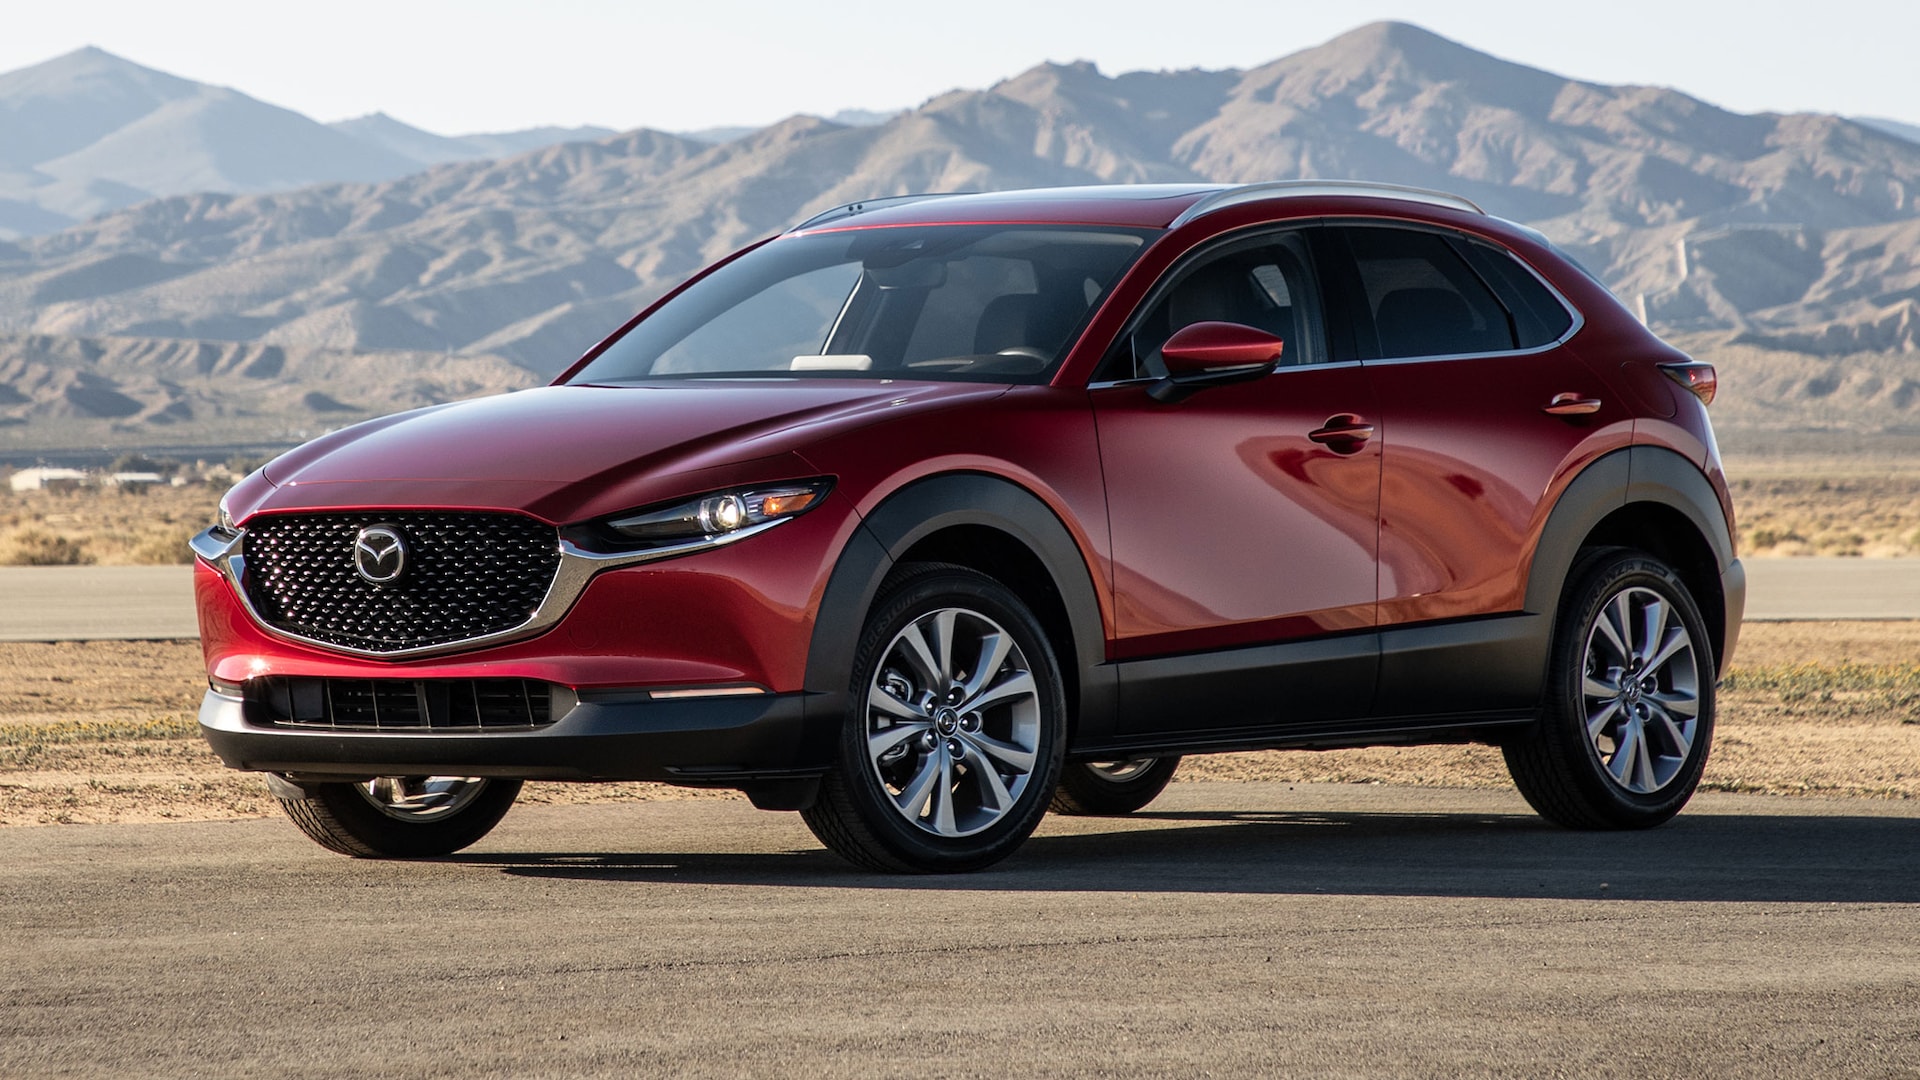 2020 Mazda CX-30 Interior Review: Does it Meet the Brand's High Standards?